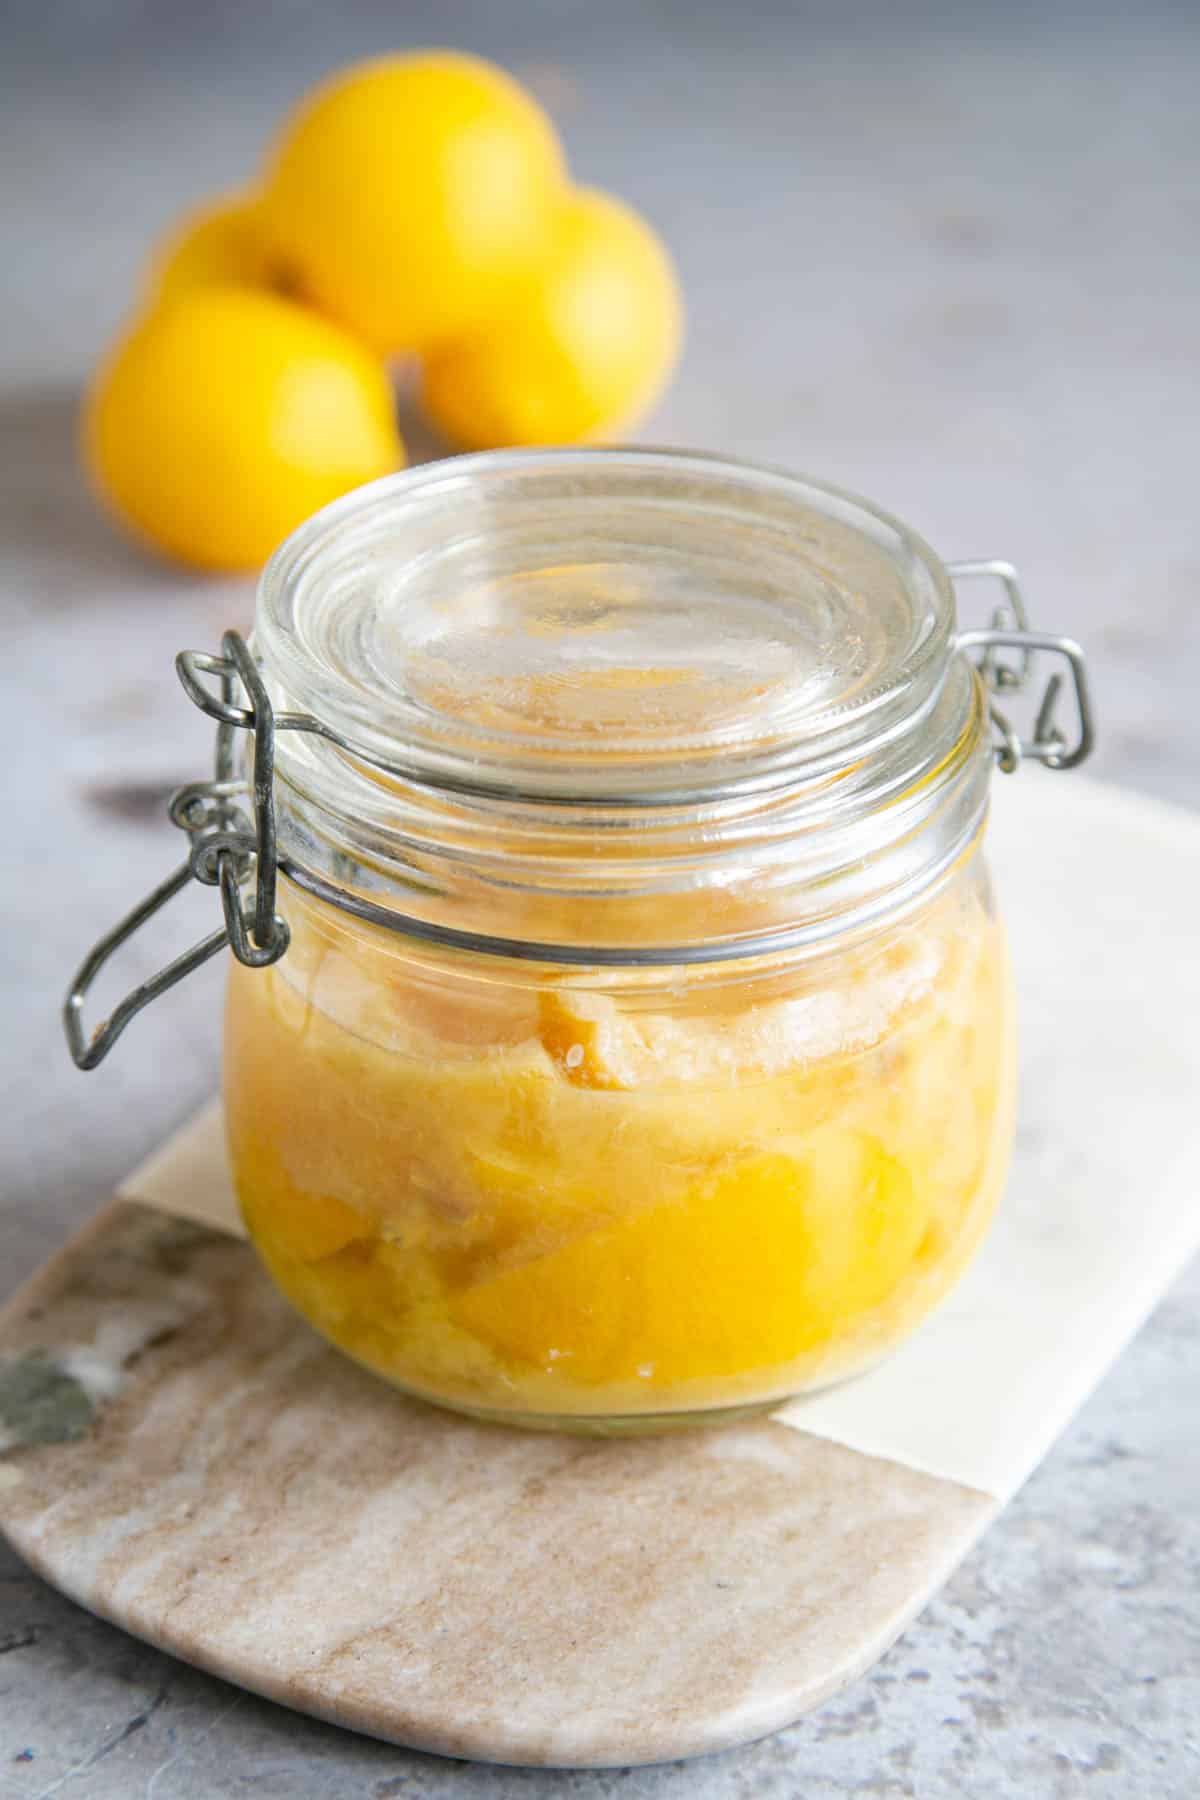 The lemons packed tight in a jar, which must be shaken from time to time as the lemons mature.